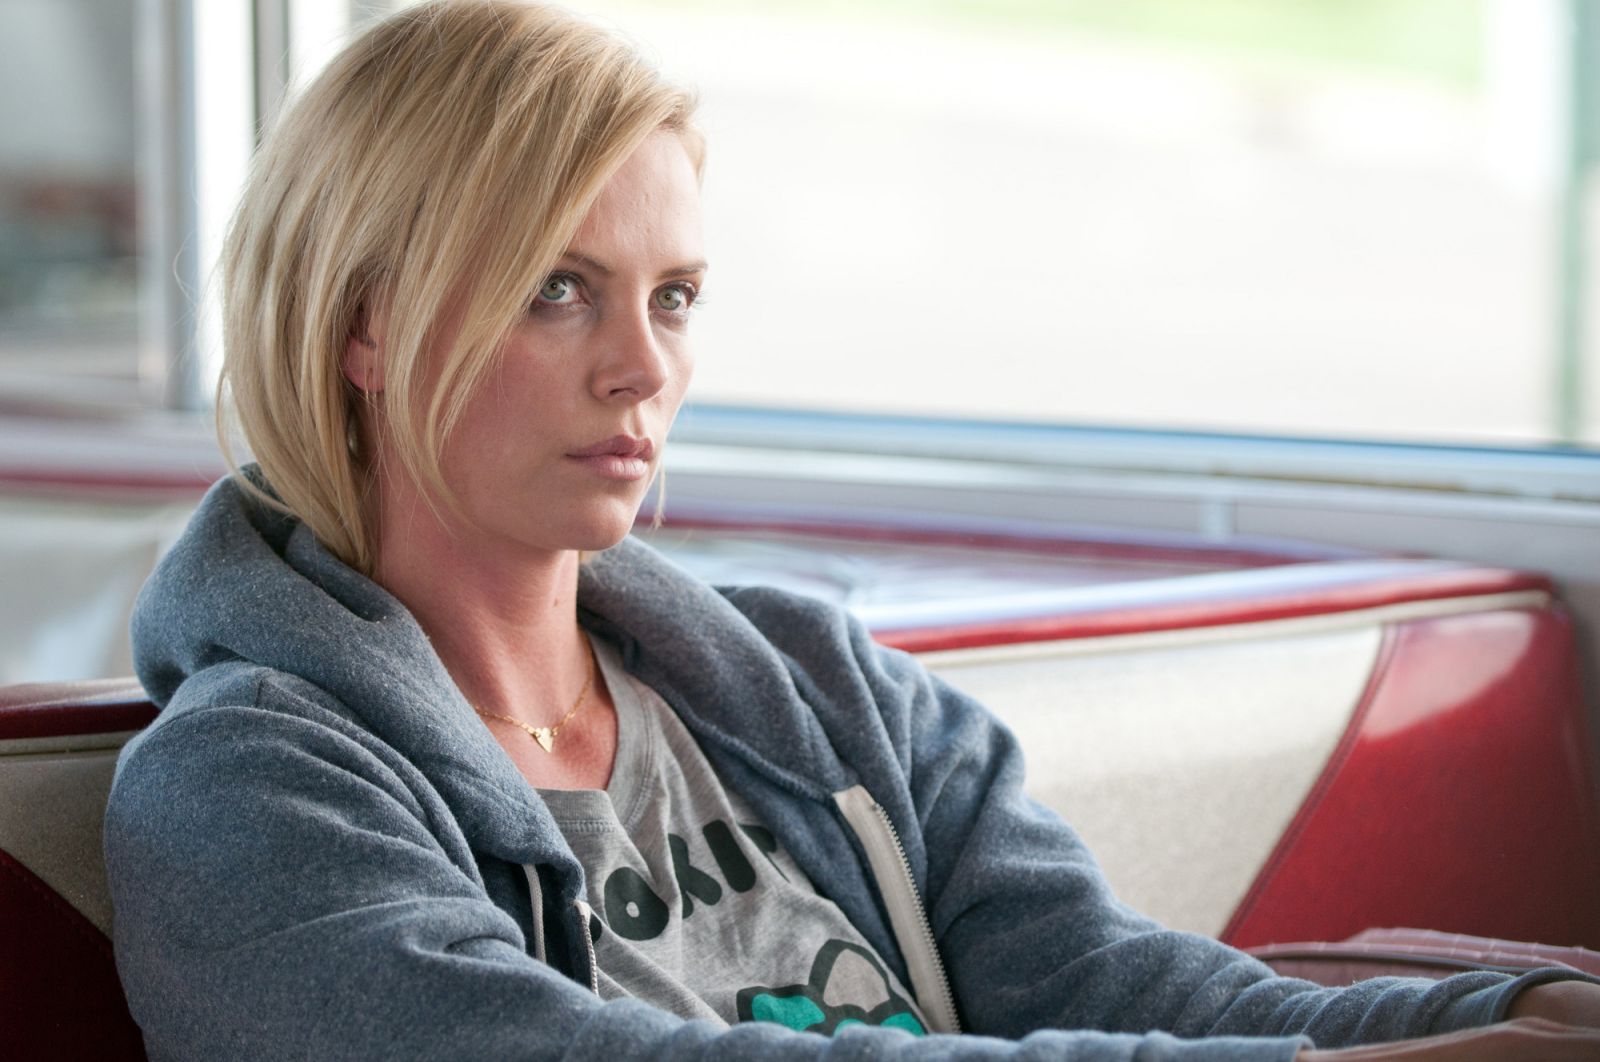 Early Review: Charlize Theron stuns in "Young Adult," a beautifully